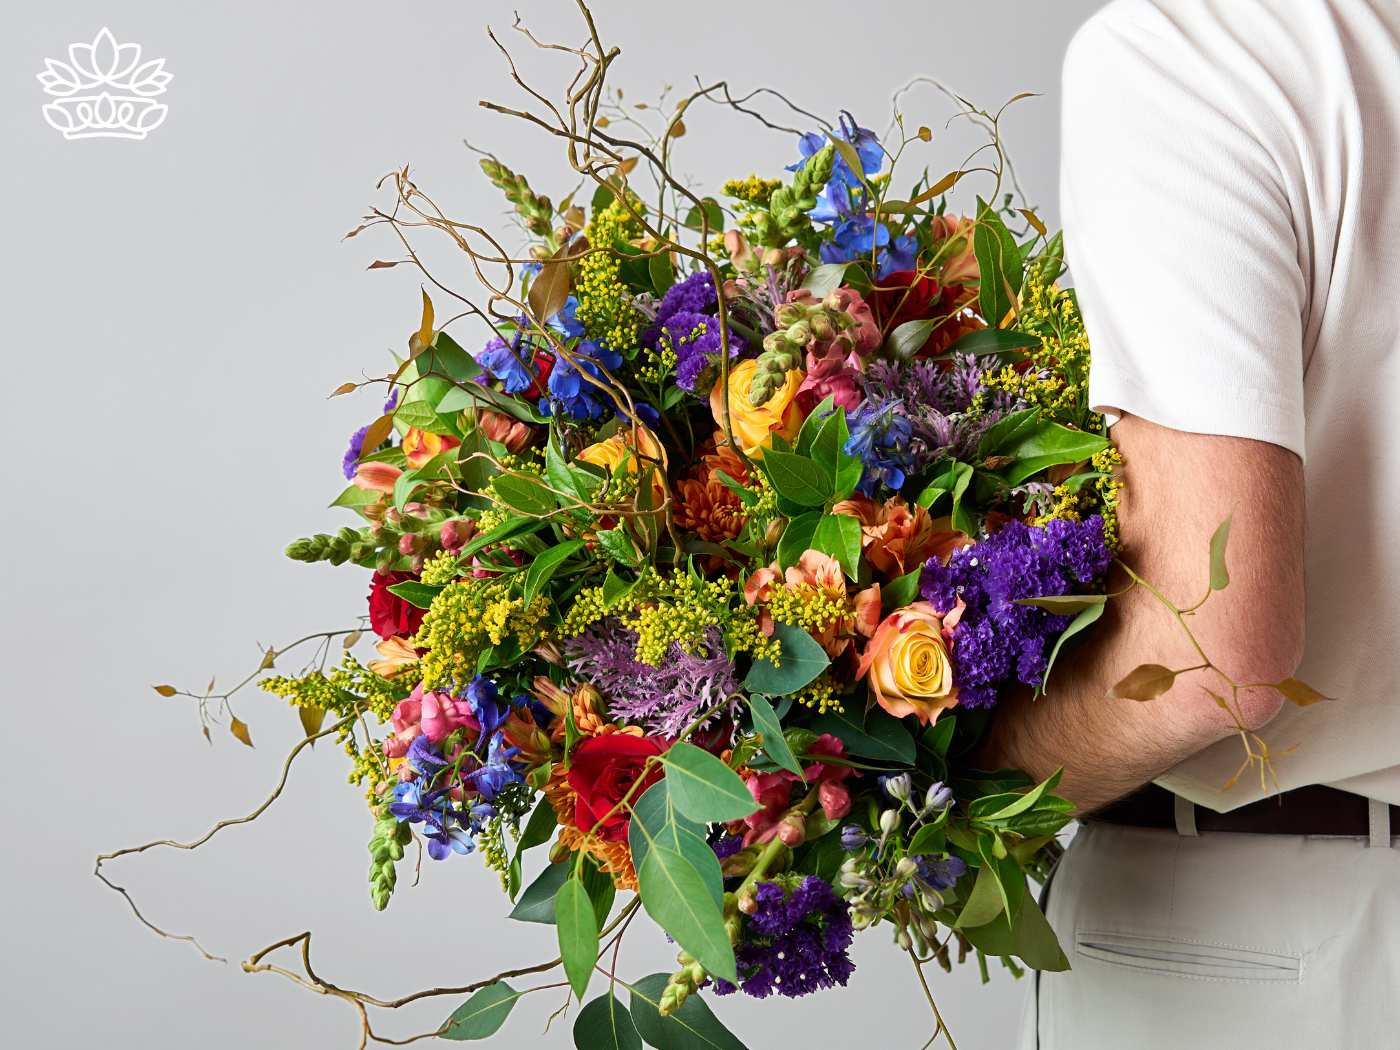 Alt text: "Man holding a lavish bouquet filled with a vibrant assortment of flowers including roses, snapdragons, and statice in a rich palette of blues, purples, oranges, and yellows, representing celebration and joy. Graduation. Delivered with Heart. Fabulous Flowers and Gifts.